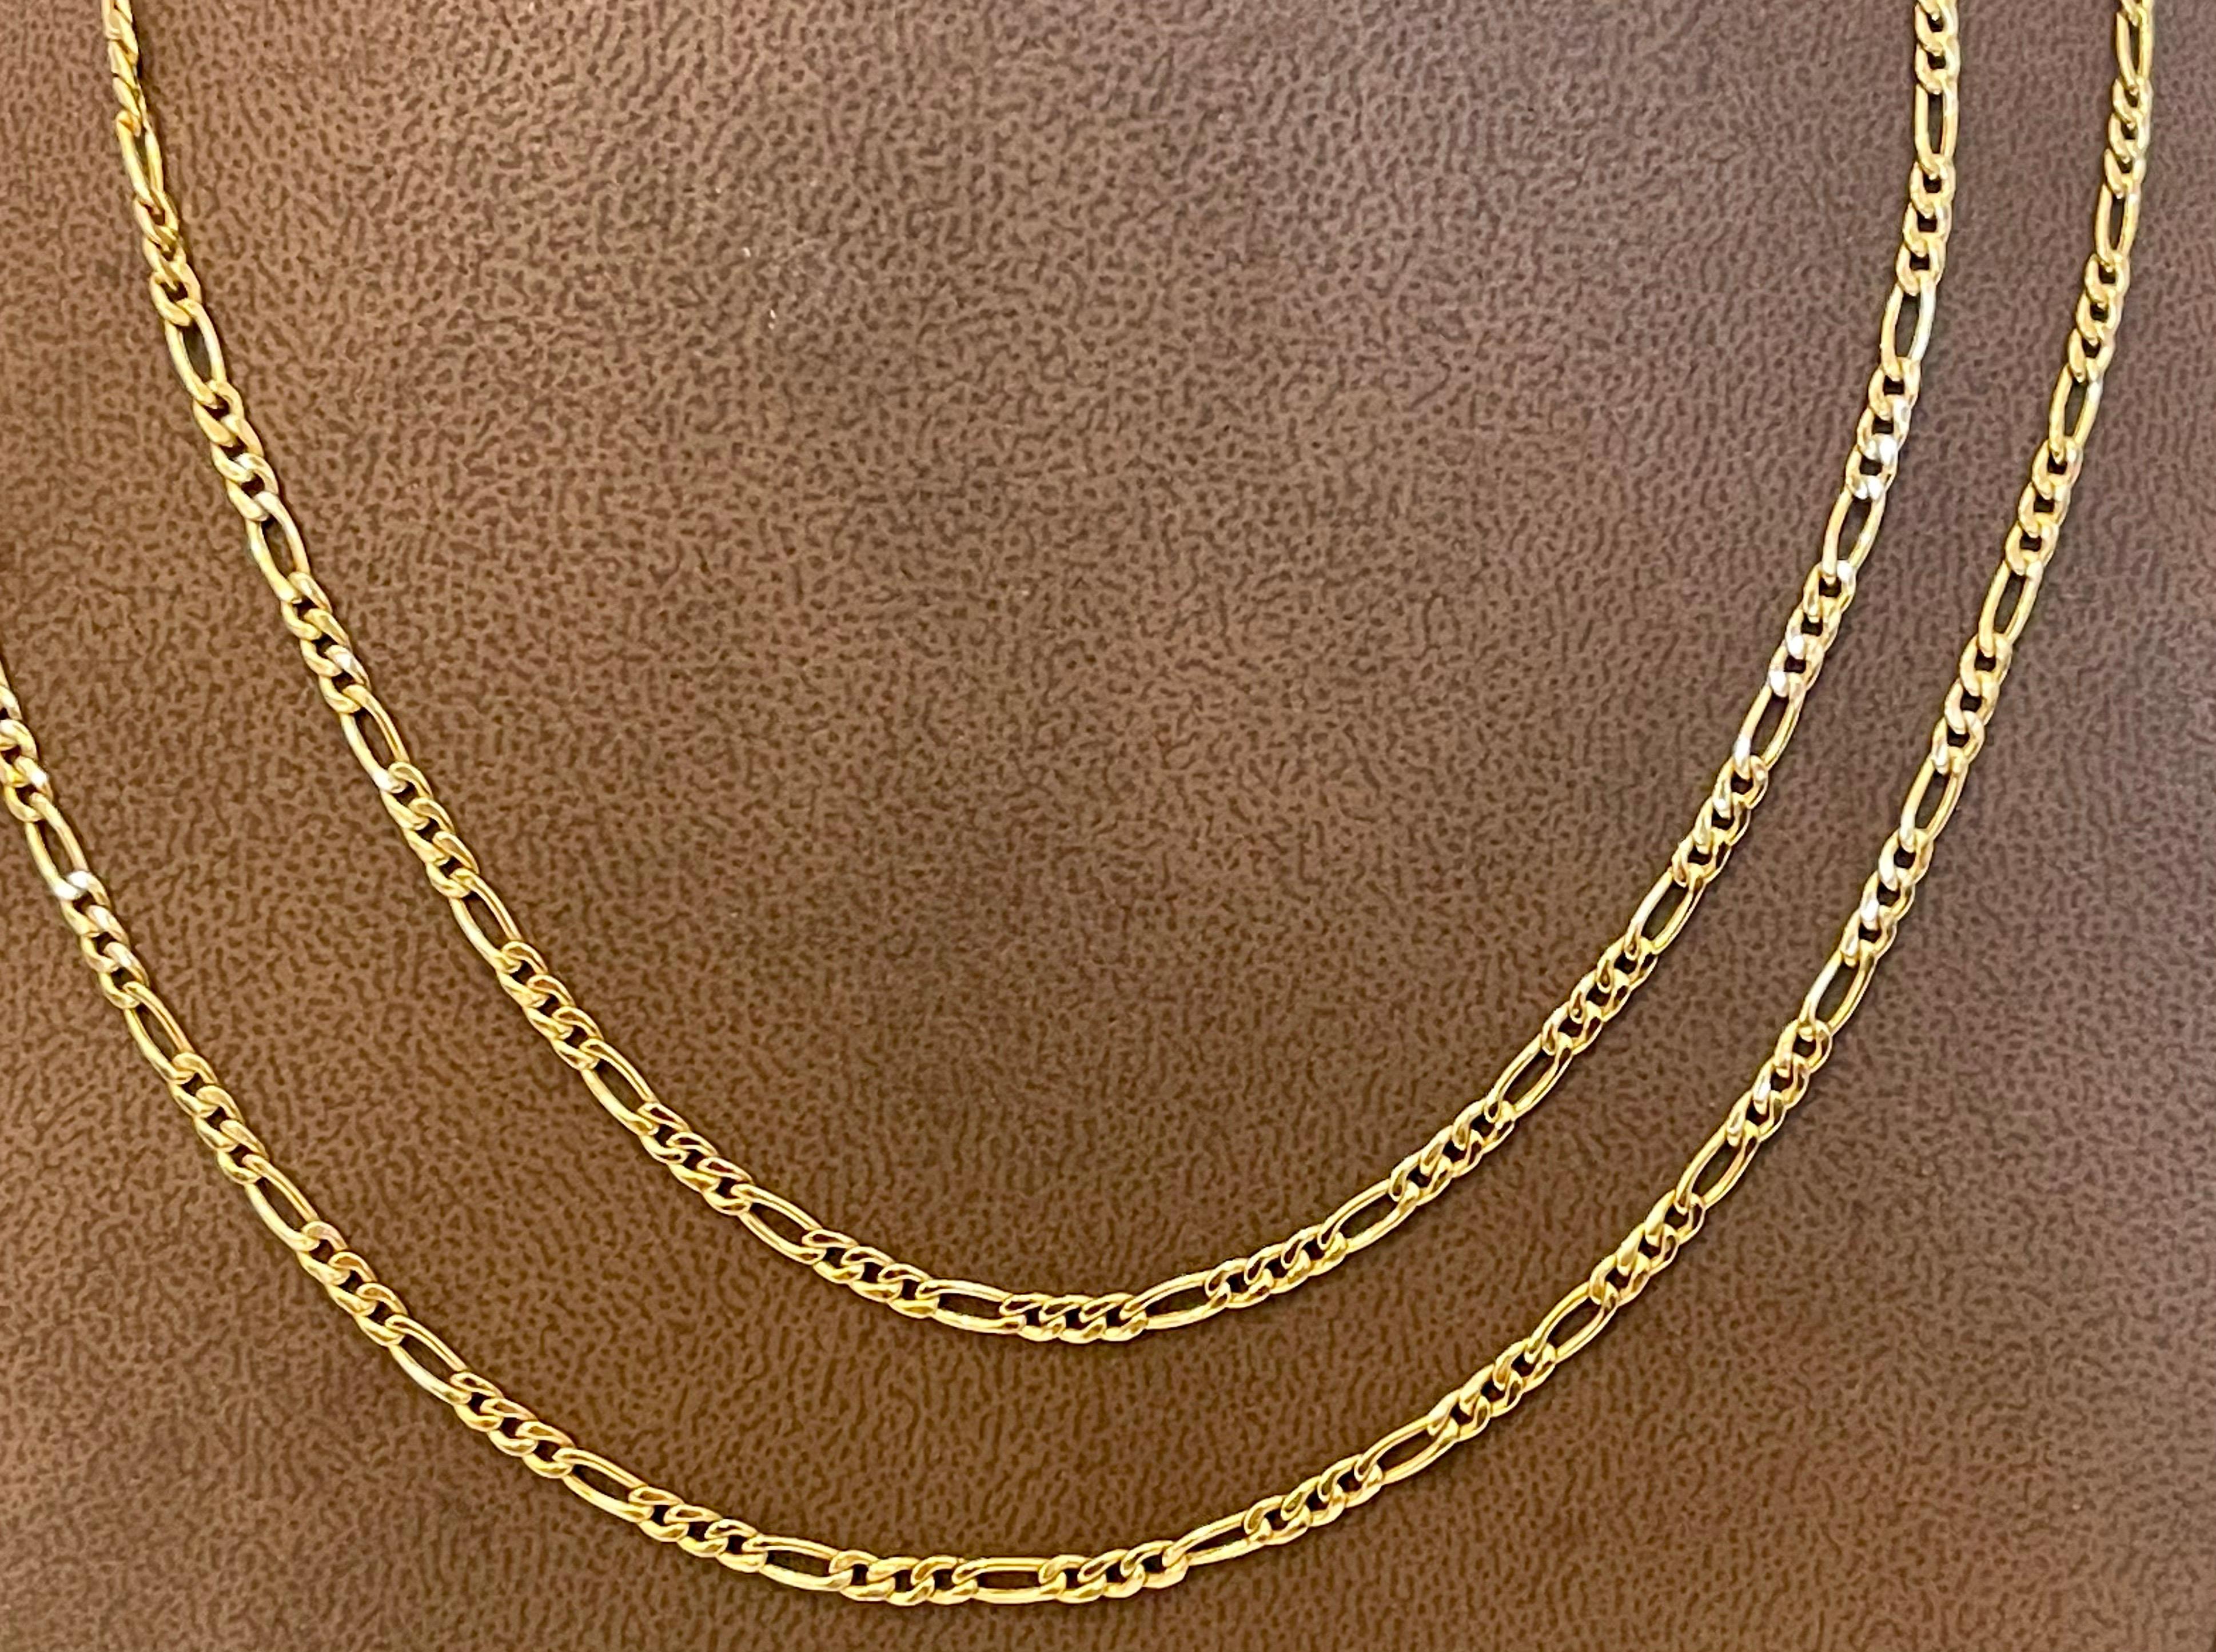 Vintage 14 Karat Yellow Gold 4 Gm Figaro Chain Necklace For Sale 2